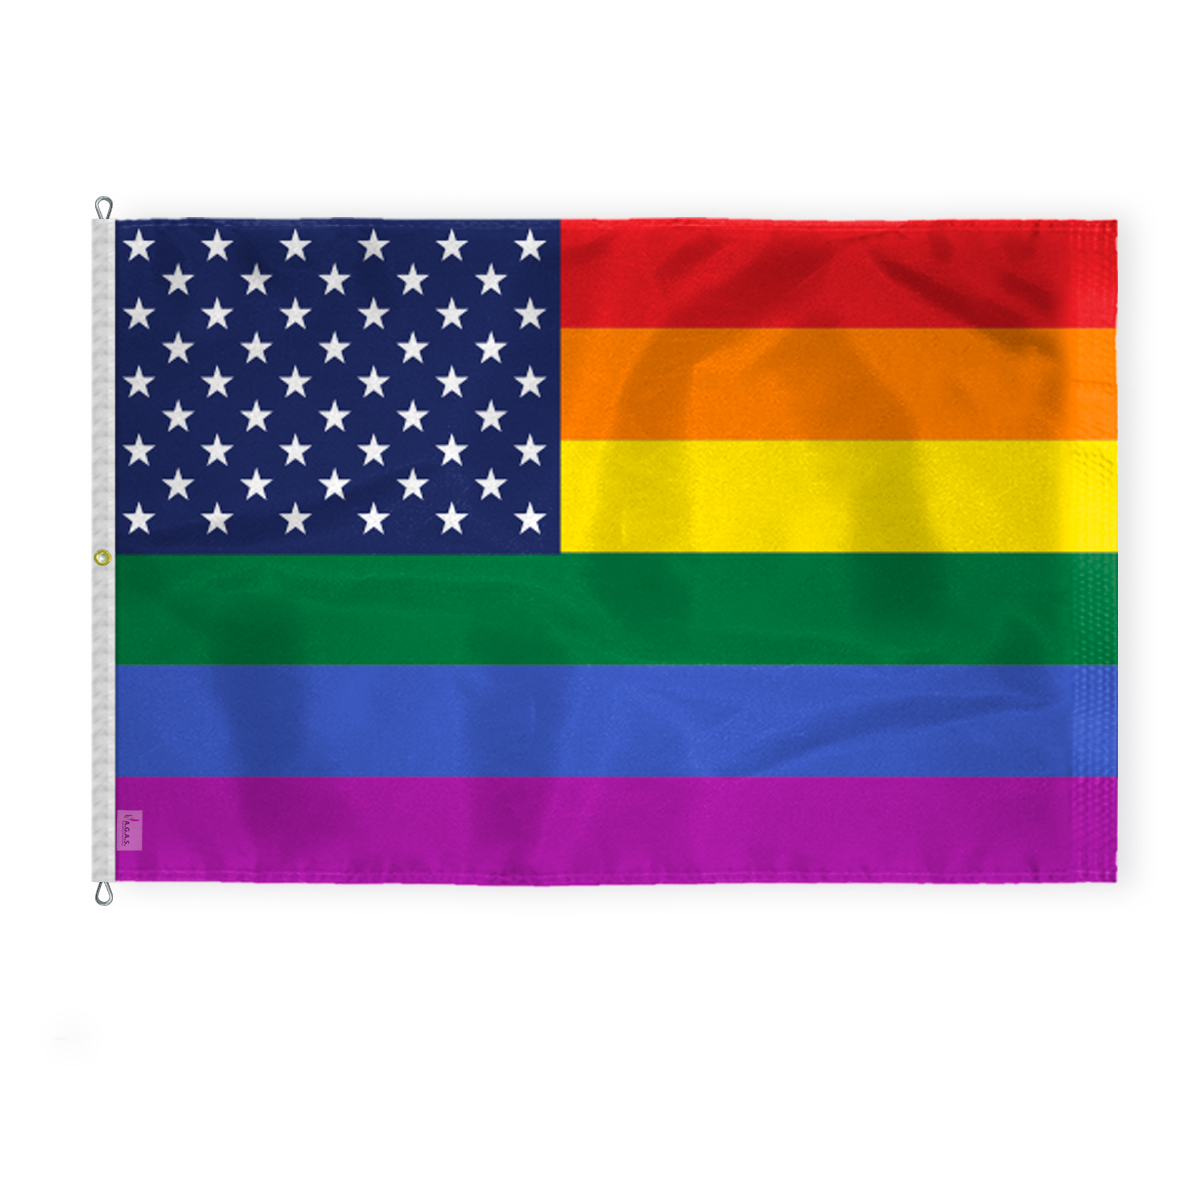 AGAS Large New Old Glory Pride Flag 8x12 Ft